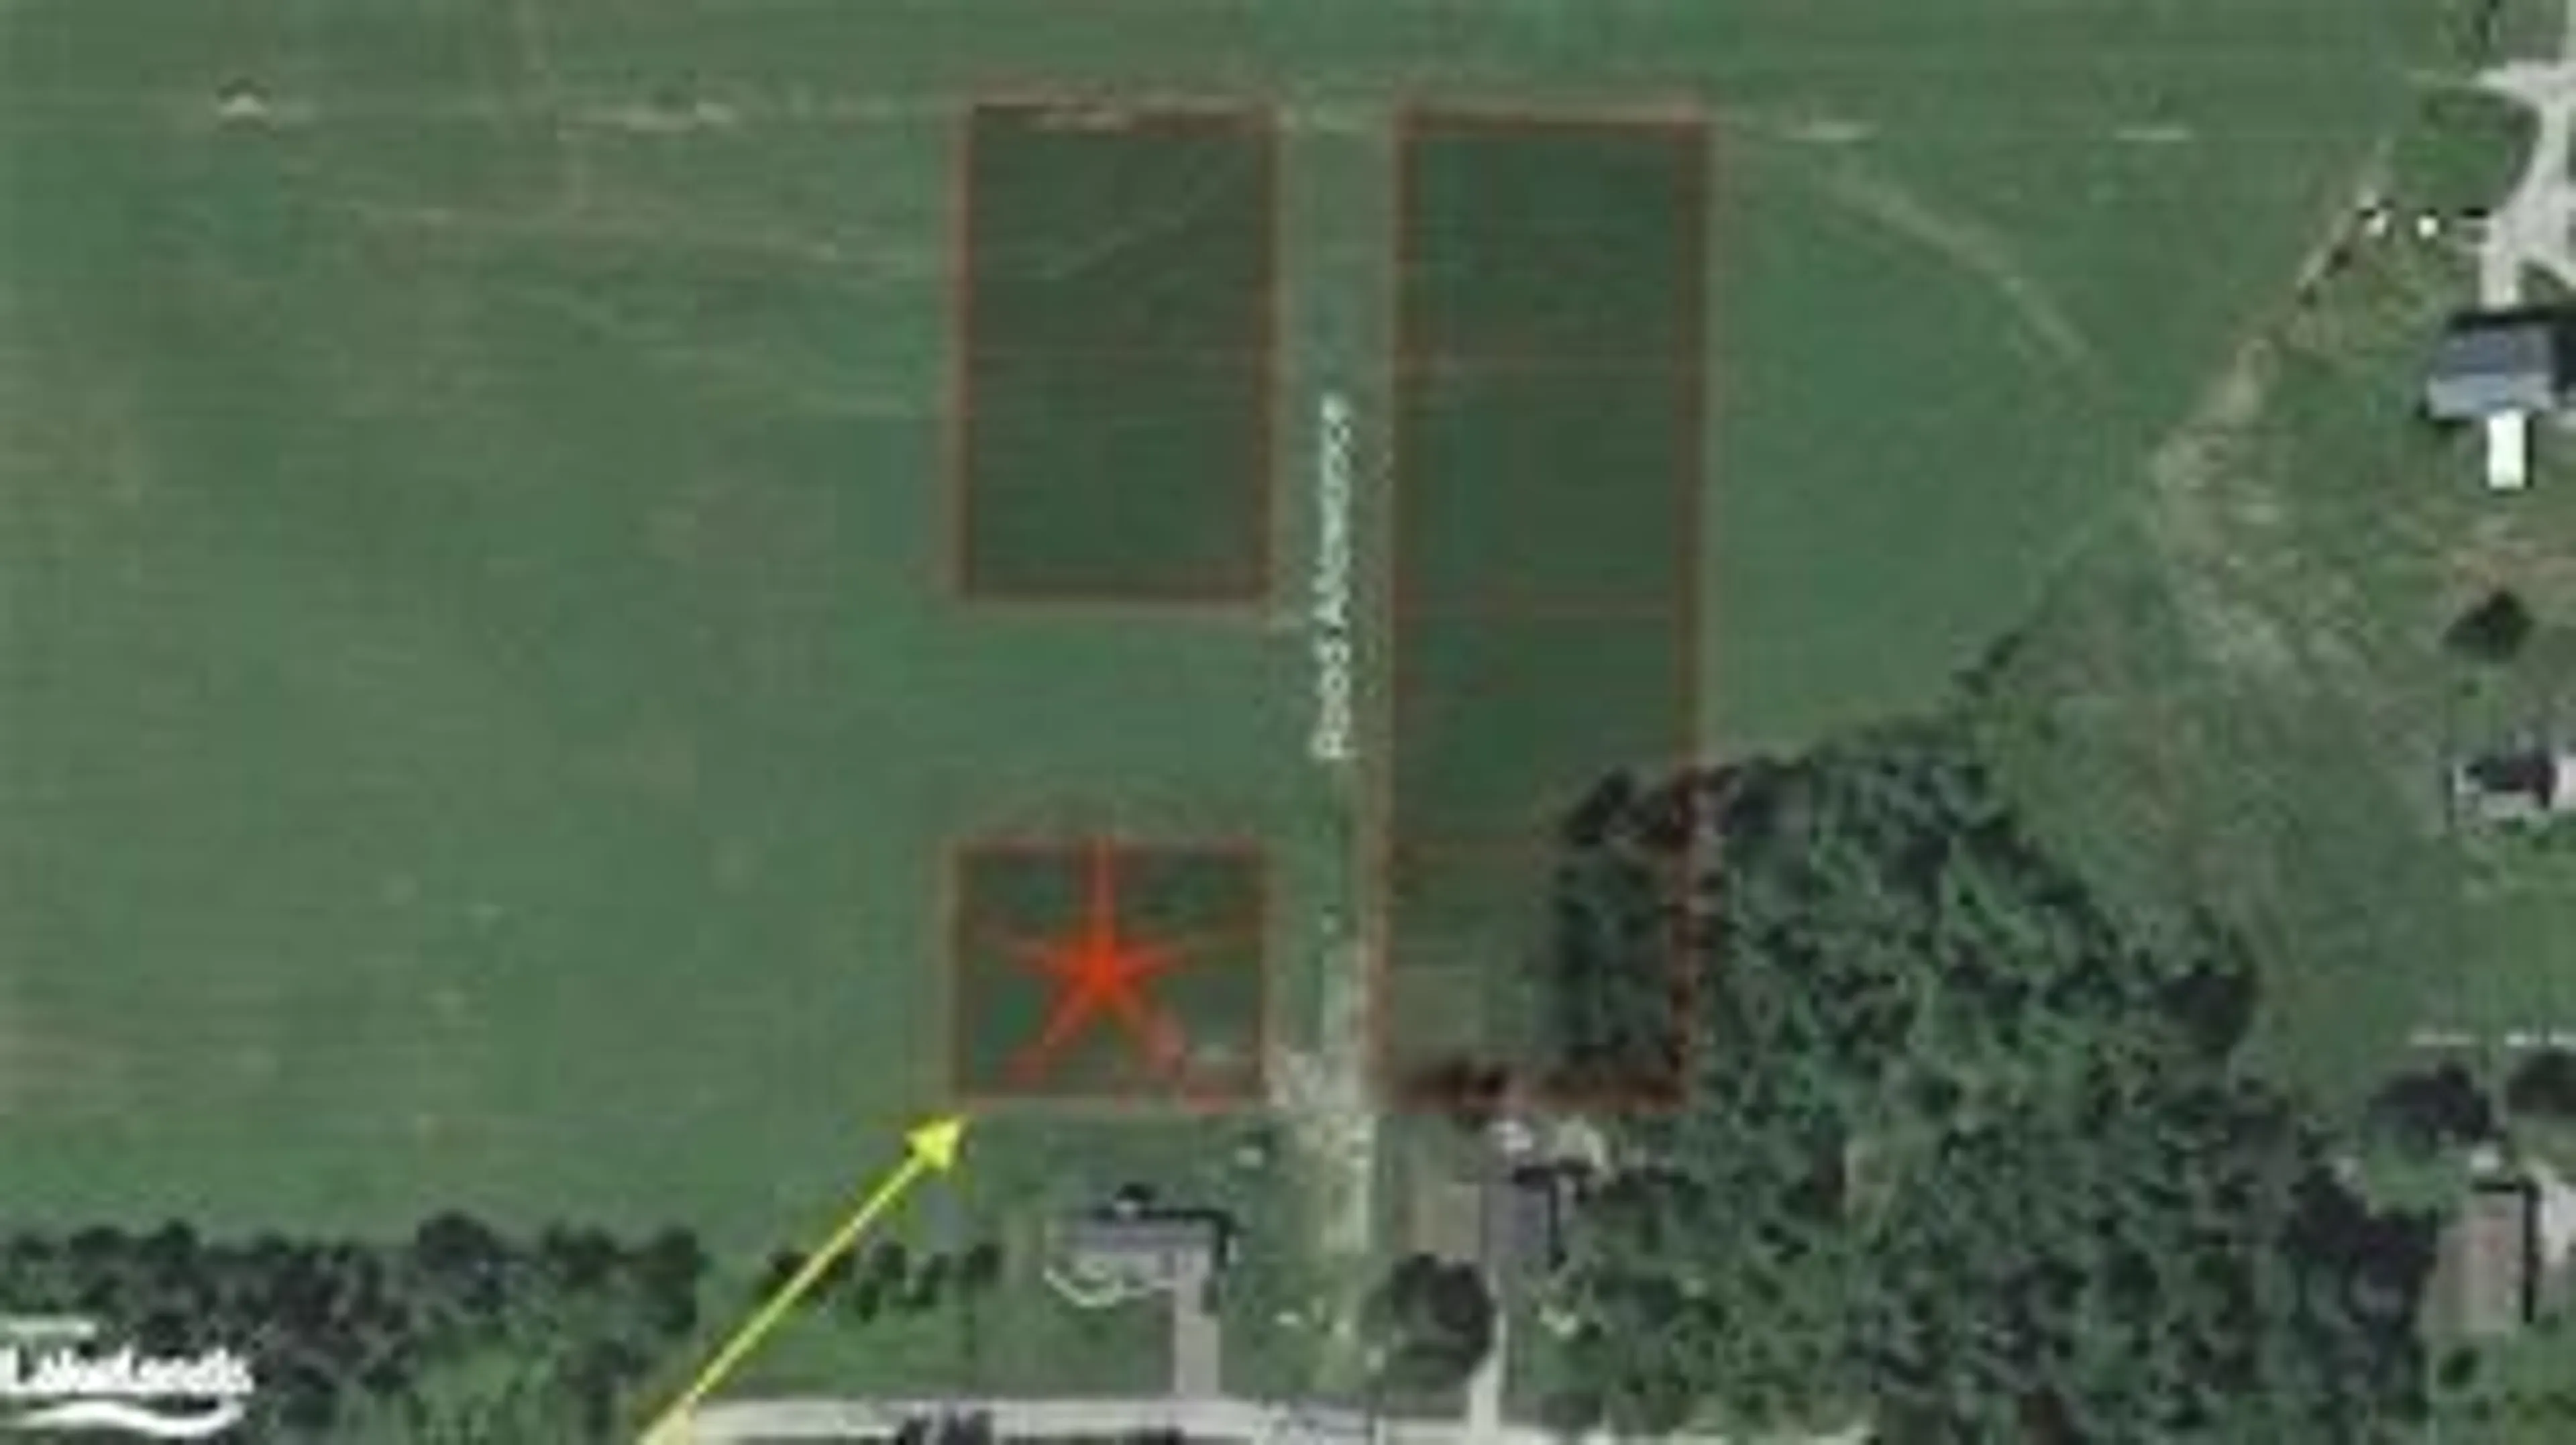 Street view for LOT 9 George St, Magnetawan Ontario P0A 1P0